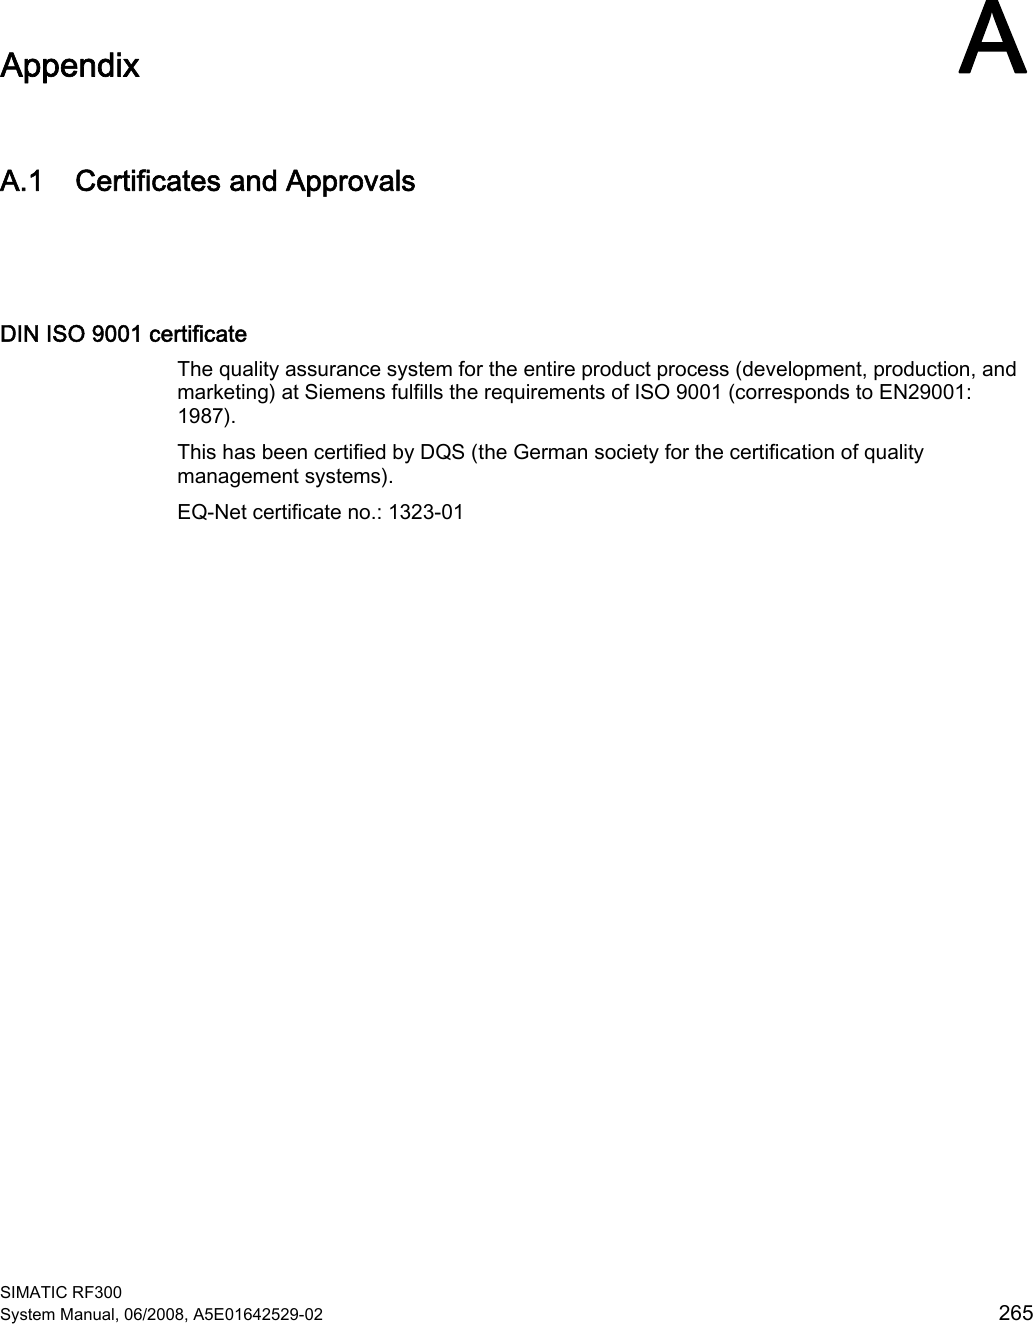  SIMATIC RF300 System Manual, 06/2008, A5E01642529-02  265 Appendix AA.1 Certificates and Approvals  DIN ISO 9001 certificate The quality assurance system for the entire product process (development, production, and marketing) at Siemens fulfills the requirements of ISO 9001 (corresponds to EN29001: 1987). This has been certified by DQS (the German society for the certification of quality management systems). EQ-Net certificate no.: 1323-01 